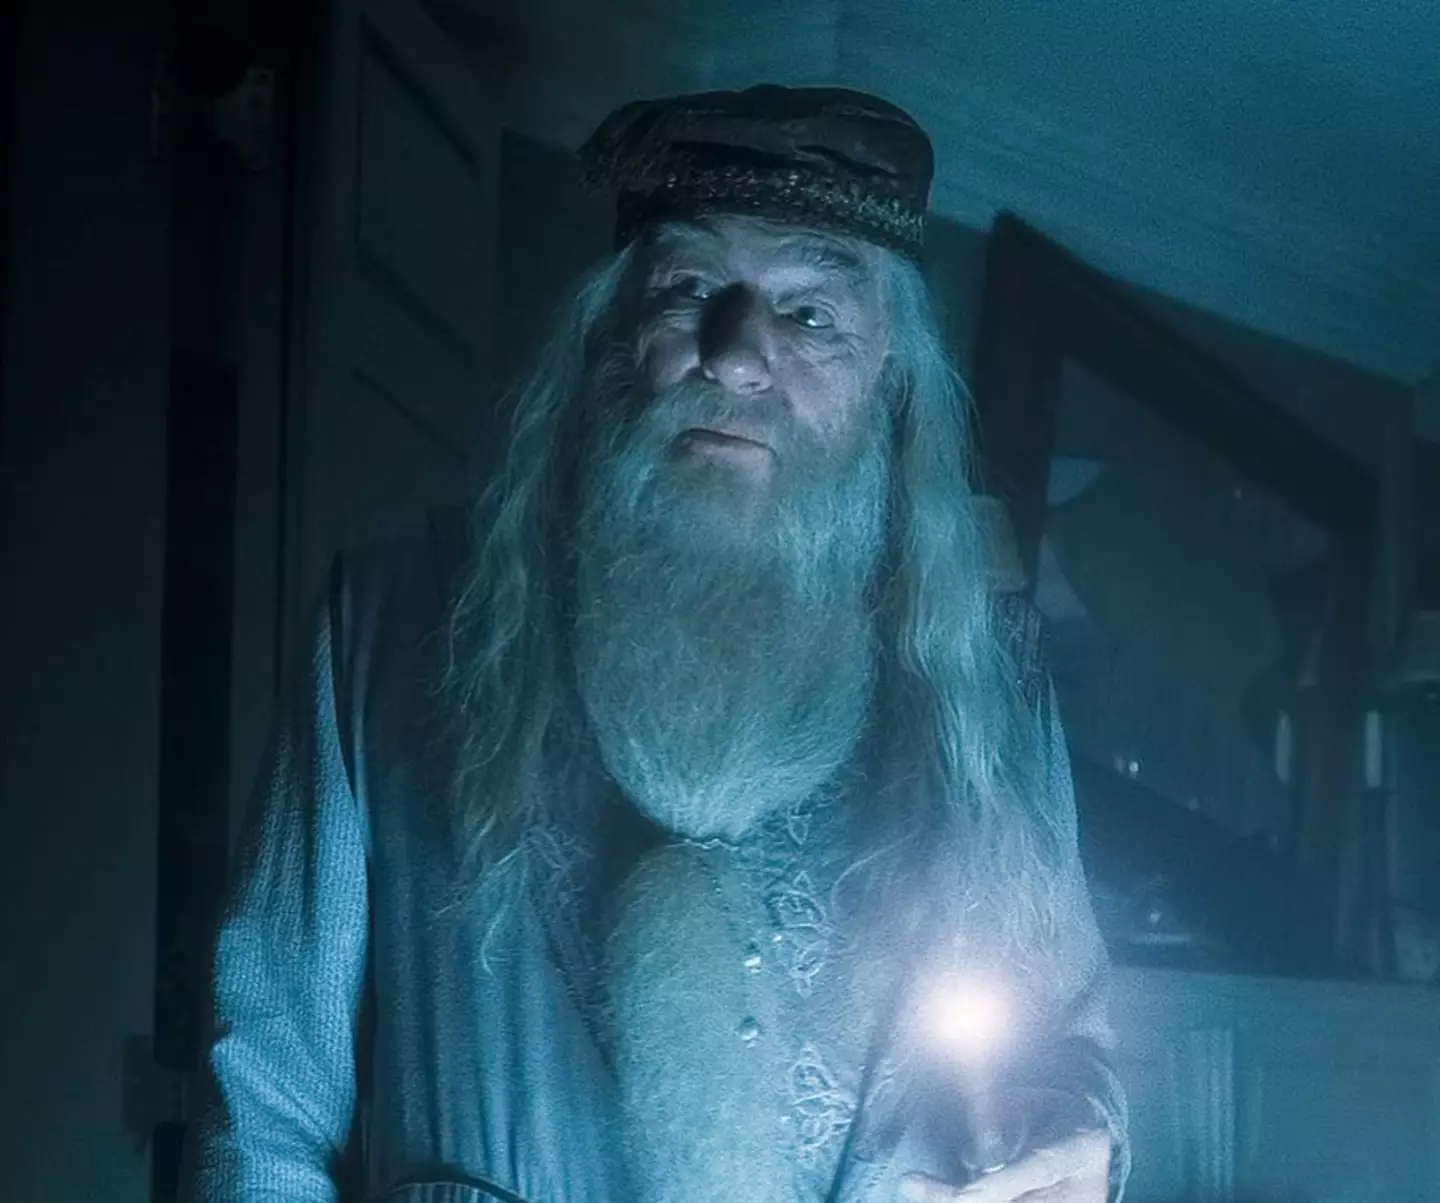 Sir Michael Gambon played Albus Dumbledore in Harry Potter.